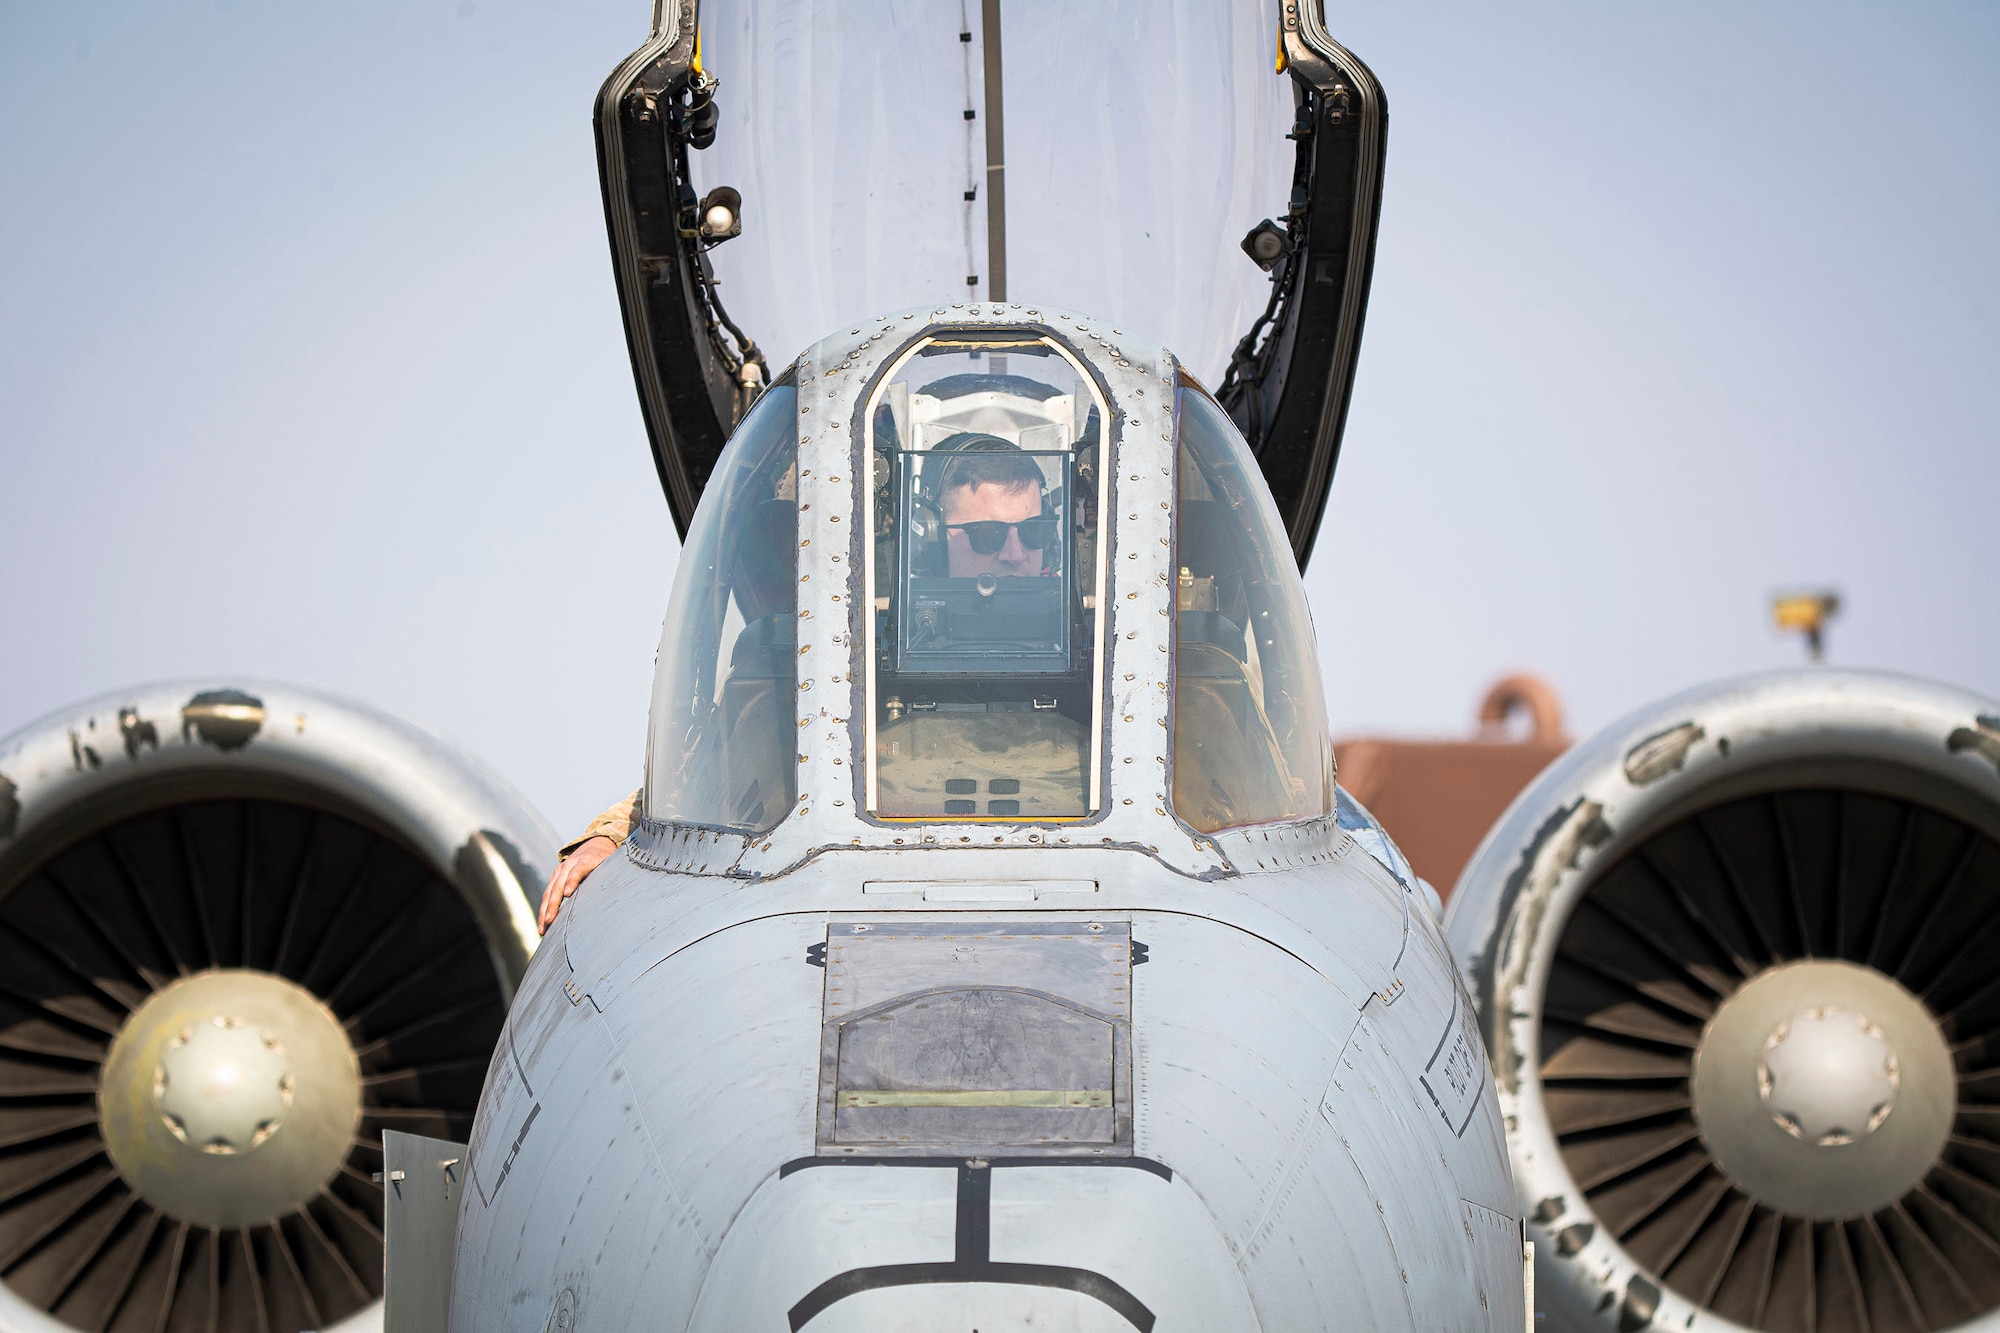 A 25th Fighter Squadron A-10C Thunderbolt II pilot performs a pre-flight check prior to takeoff April 9, 2020, at Osan Air Base, Republic of Korea. Amid the COVID-19 global pandemic, the 25th FS follows the United States Forces-Korea’s health protection control measures to preserve their mission capabilities while maintaining a high state of readiness to protect the ROK. (U.S. Air Force photo by Senior Airman Darien Perez)